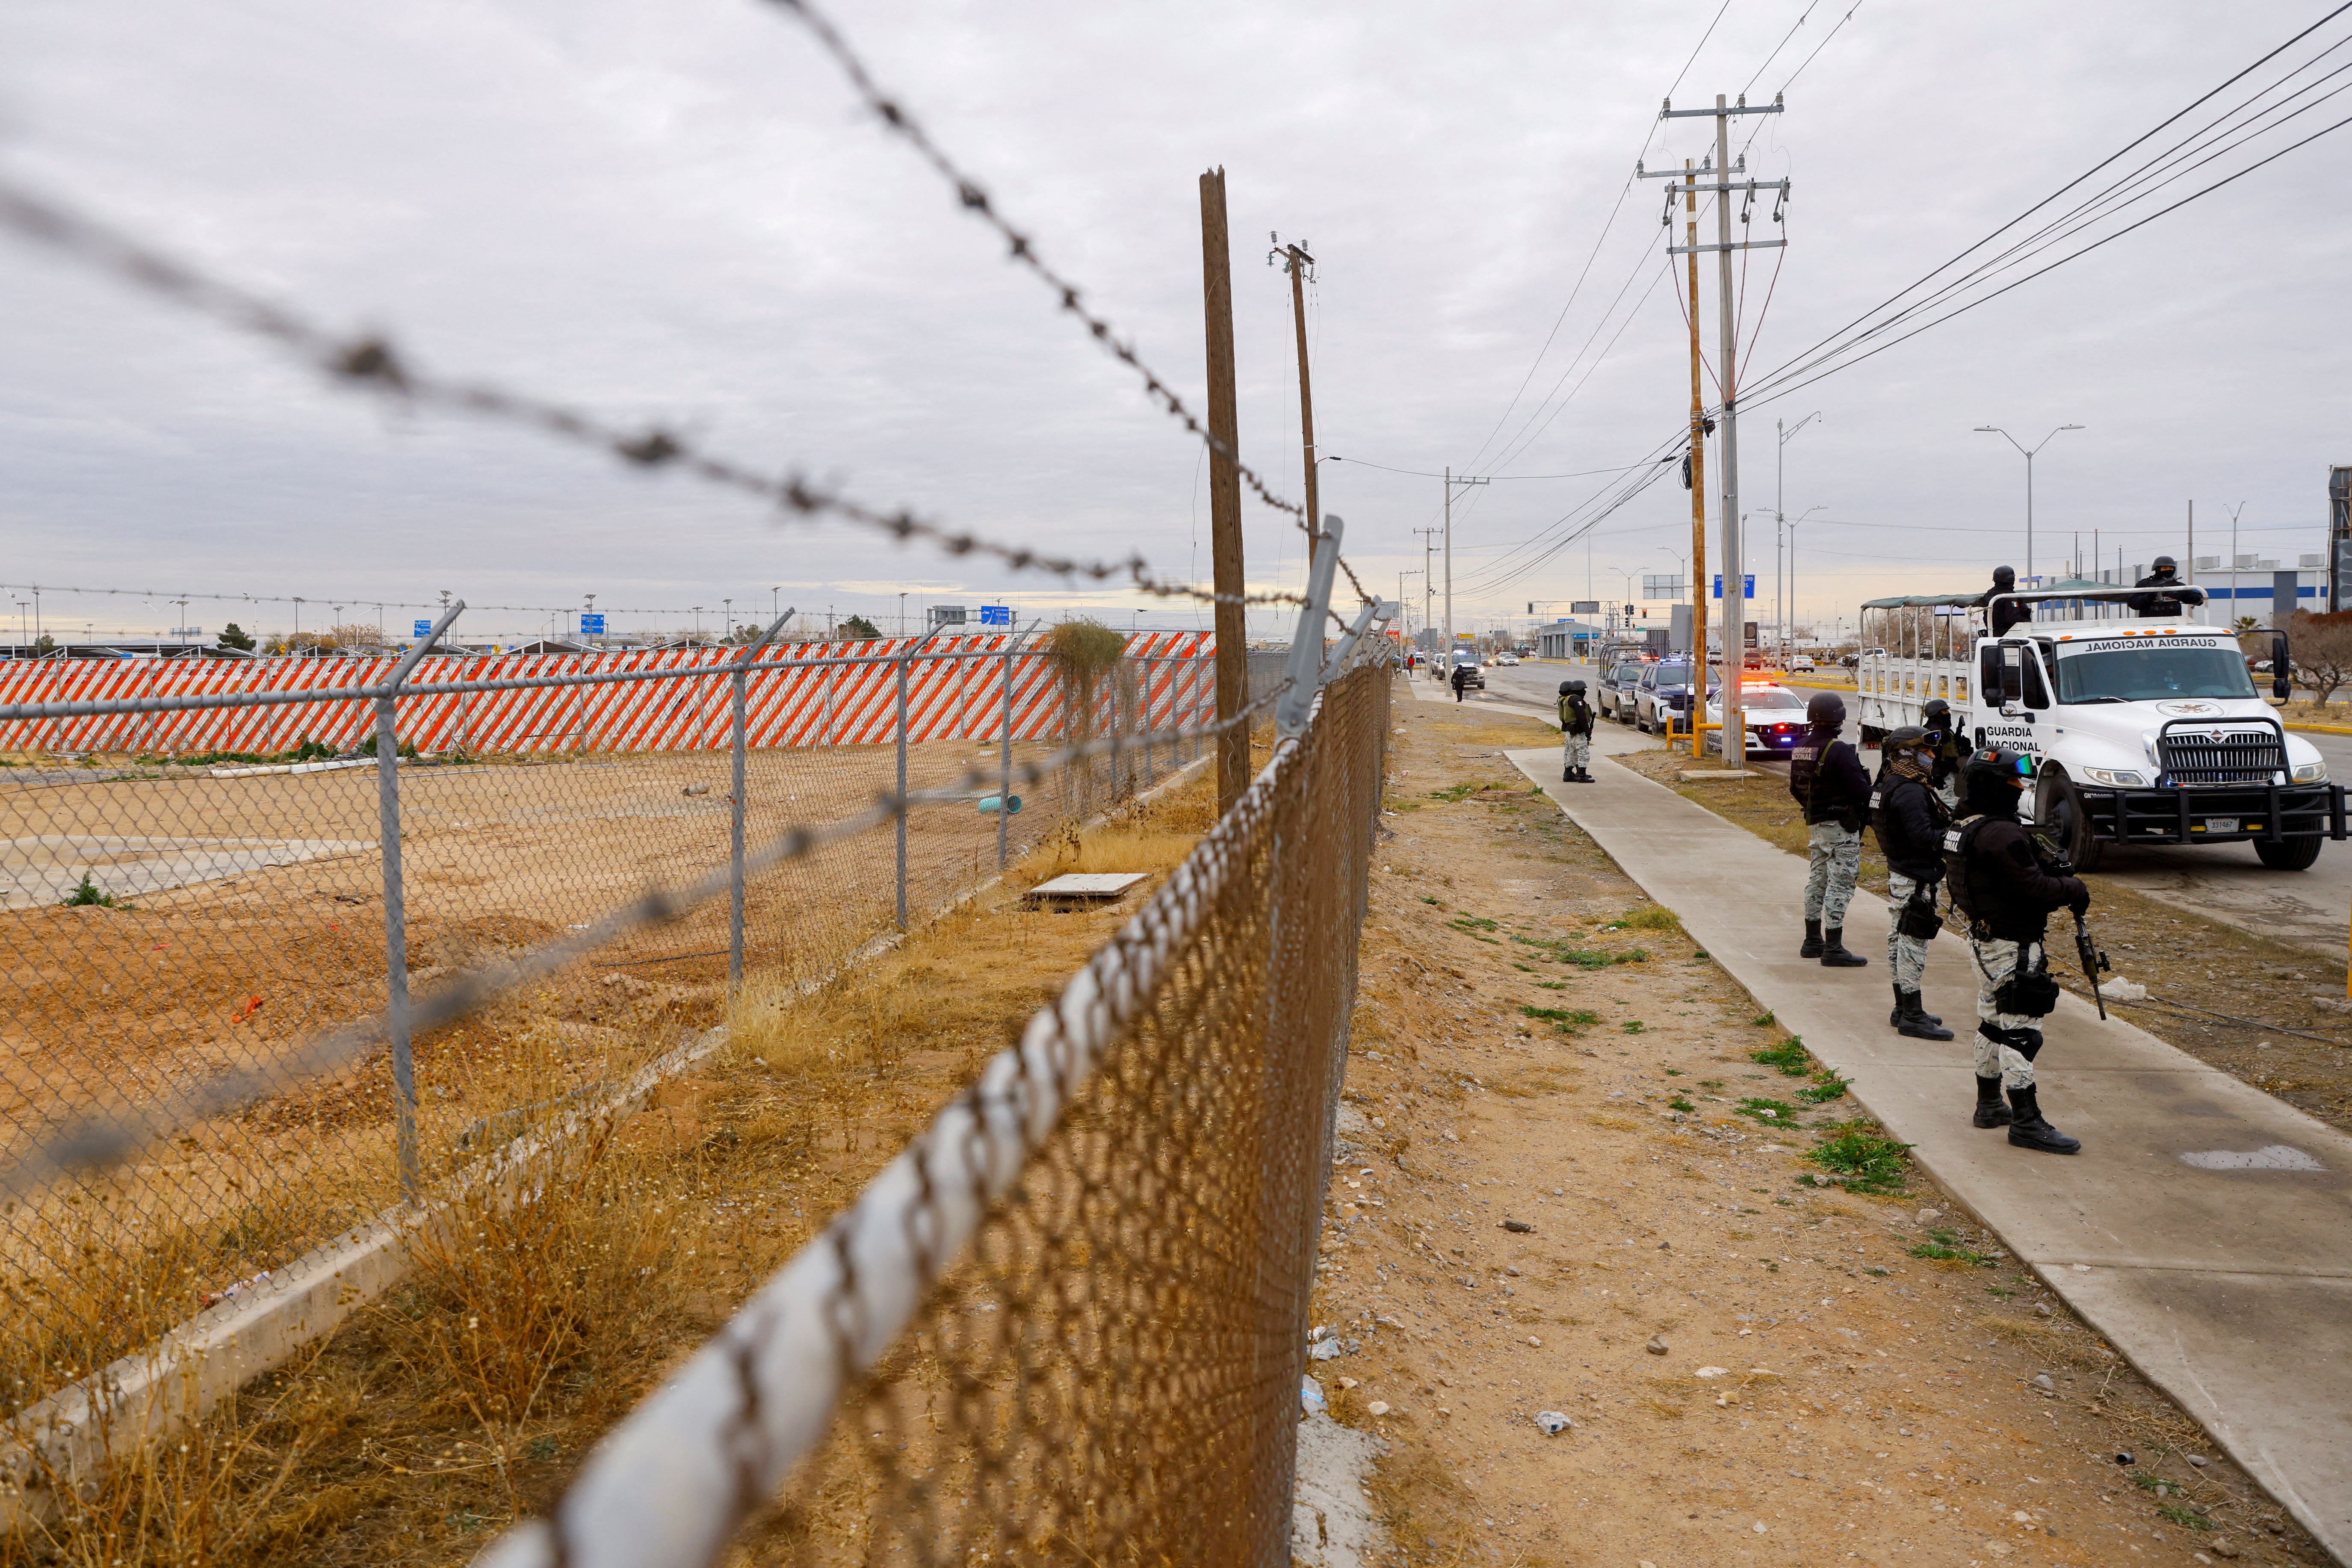 "the net" and another 29 people escaped from the Ciudad Juárez prison on January 1, 2023. (REUTERS / José Luis González)